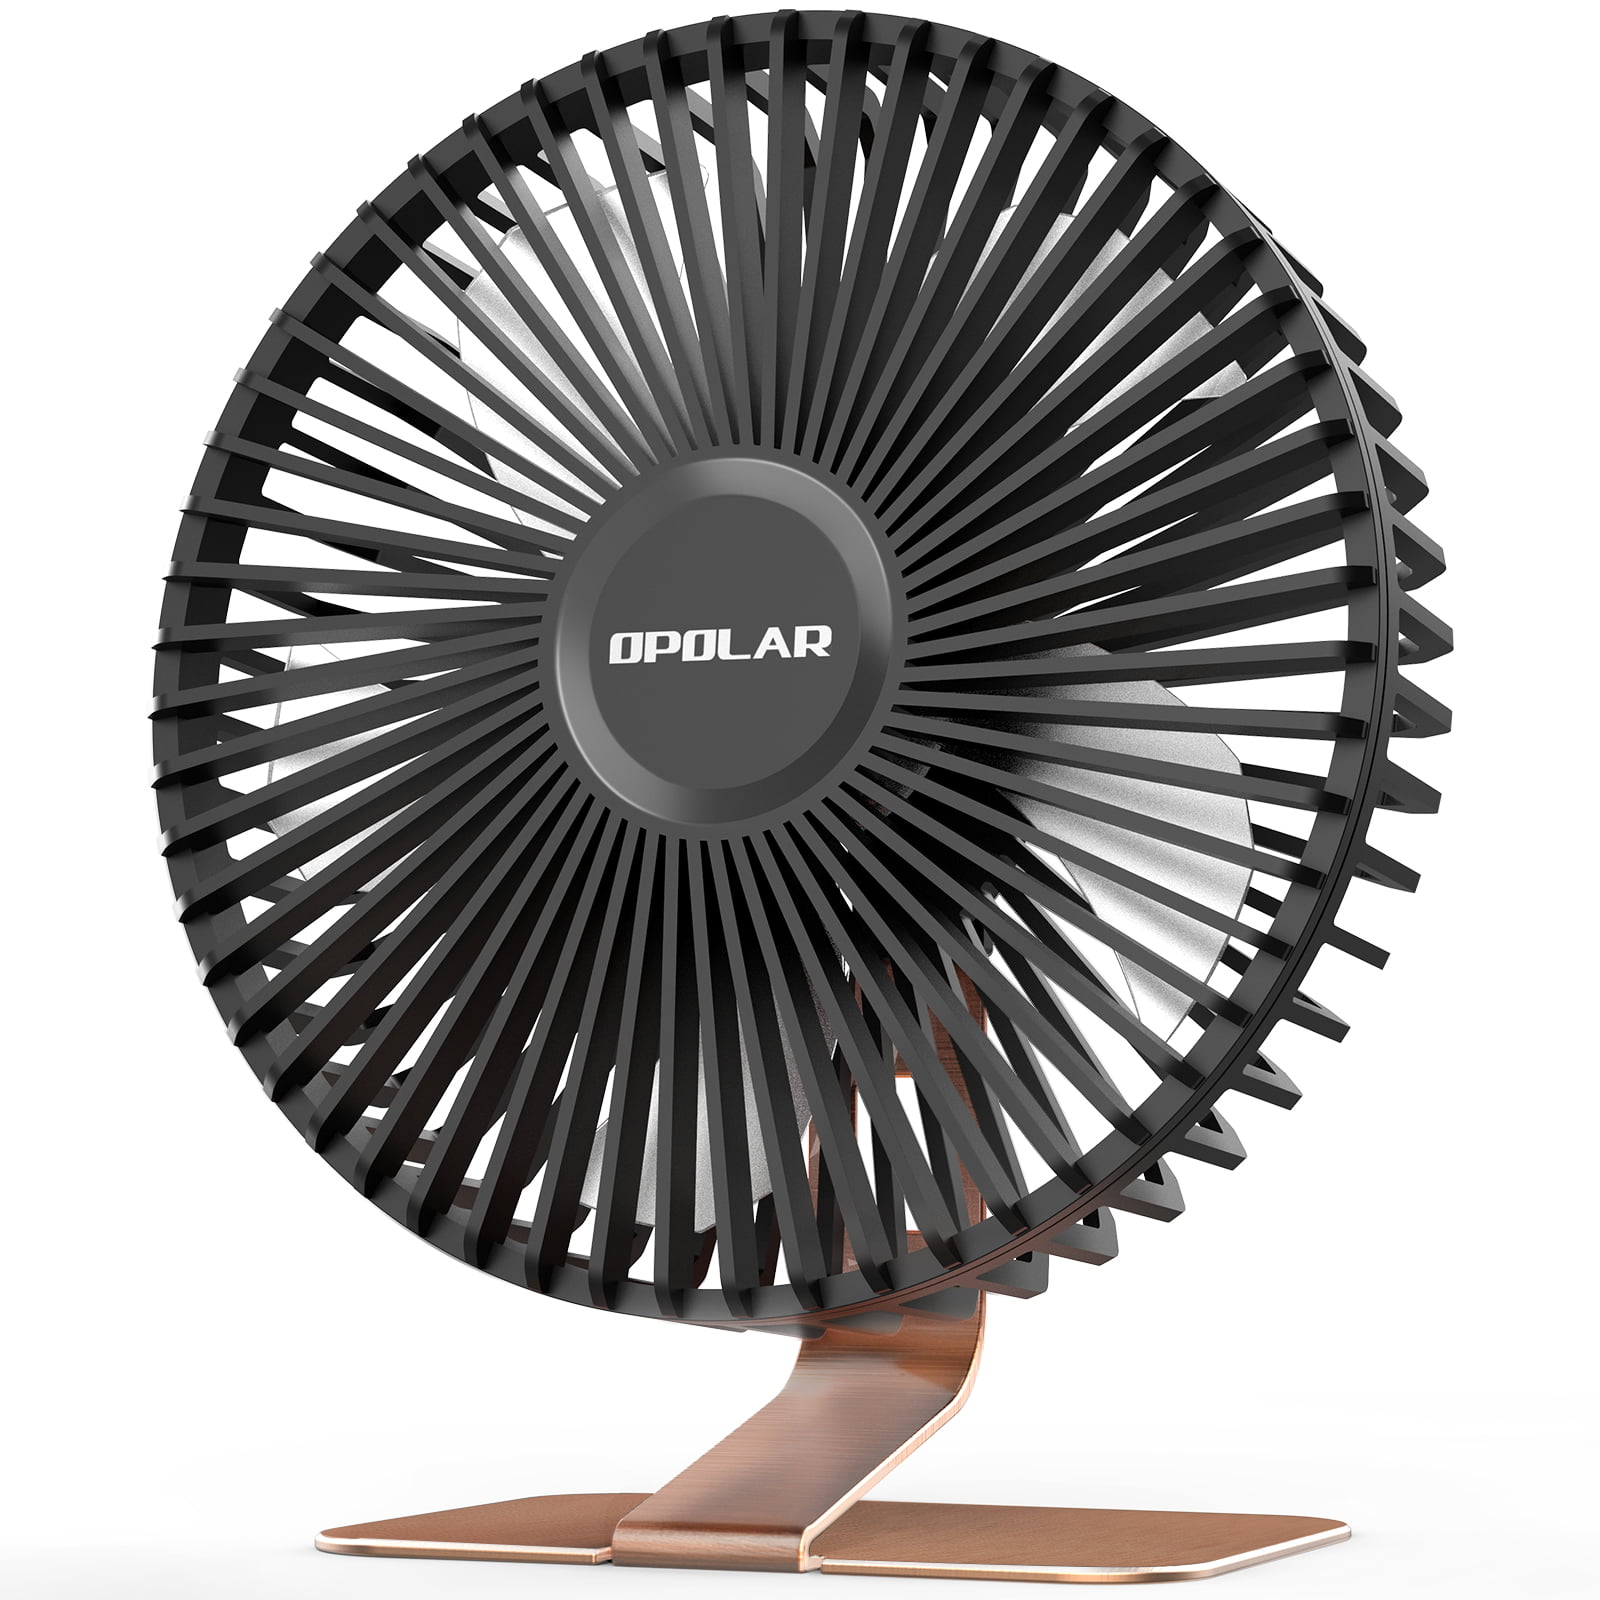 OPOLAR F228 Handheld Portable Fan with 5200mAh Battery Rechargeable Foldable 